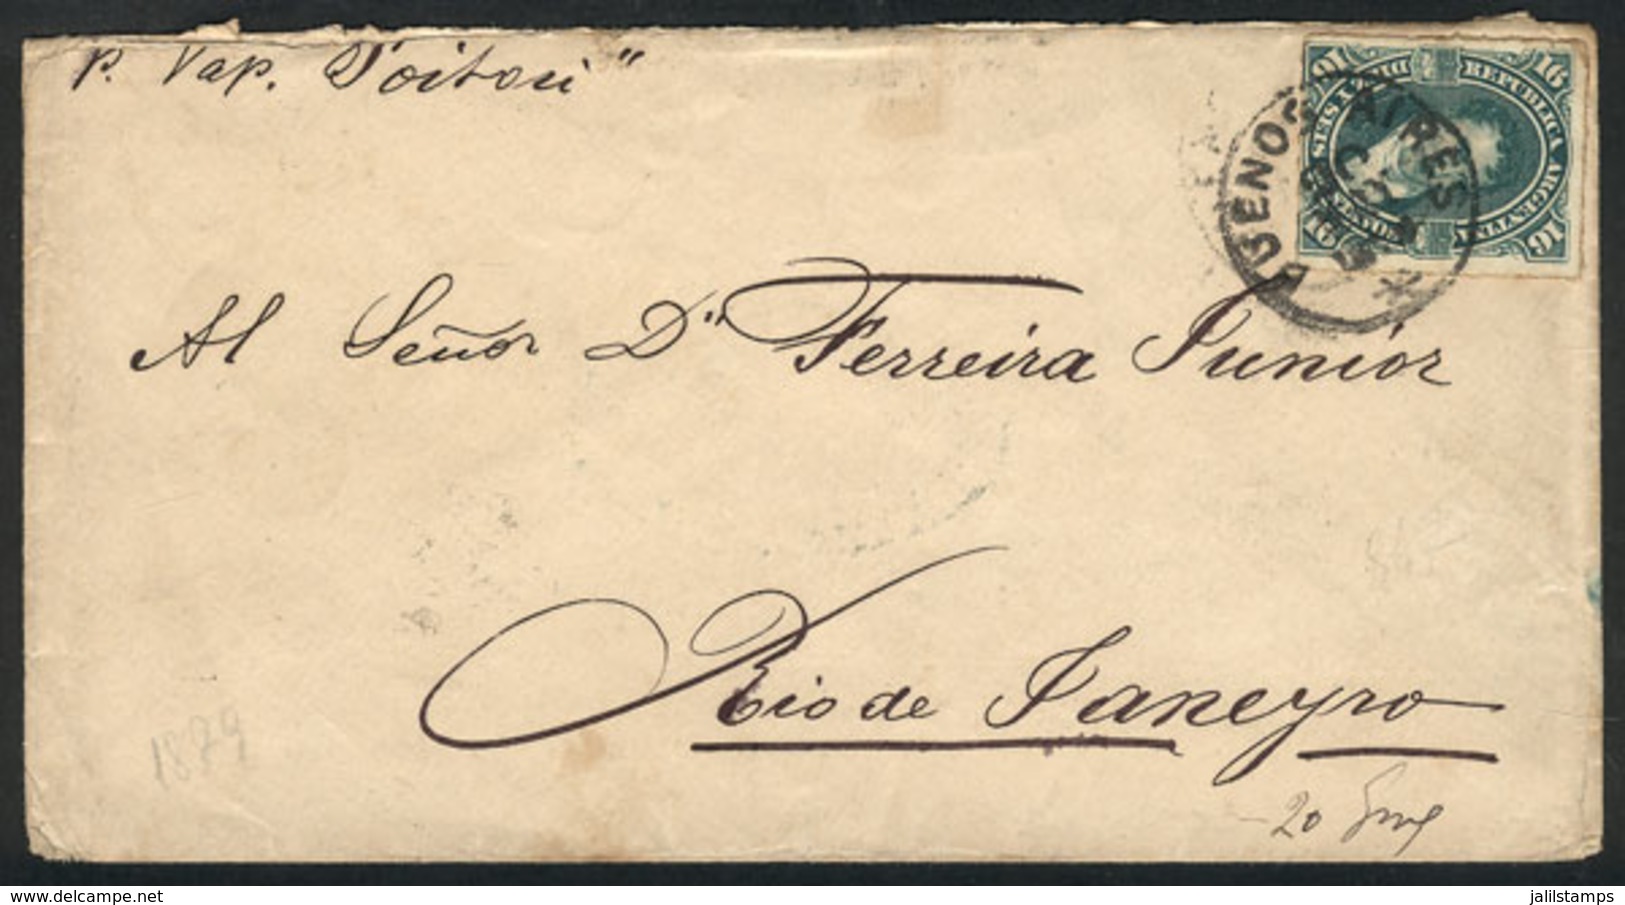 ARGENTINA: "GJ.50, 1876 Belgrano 16c. Rouletted, Franking A Cover Sent From Buenos Aires To RIO DE JANEIRO (Brazil) On 2 - Oblitérés